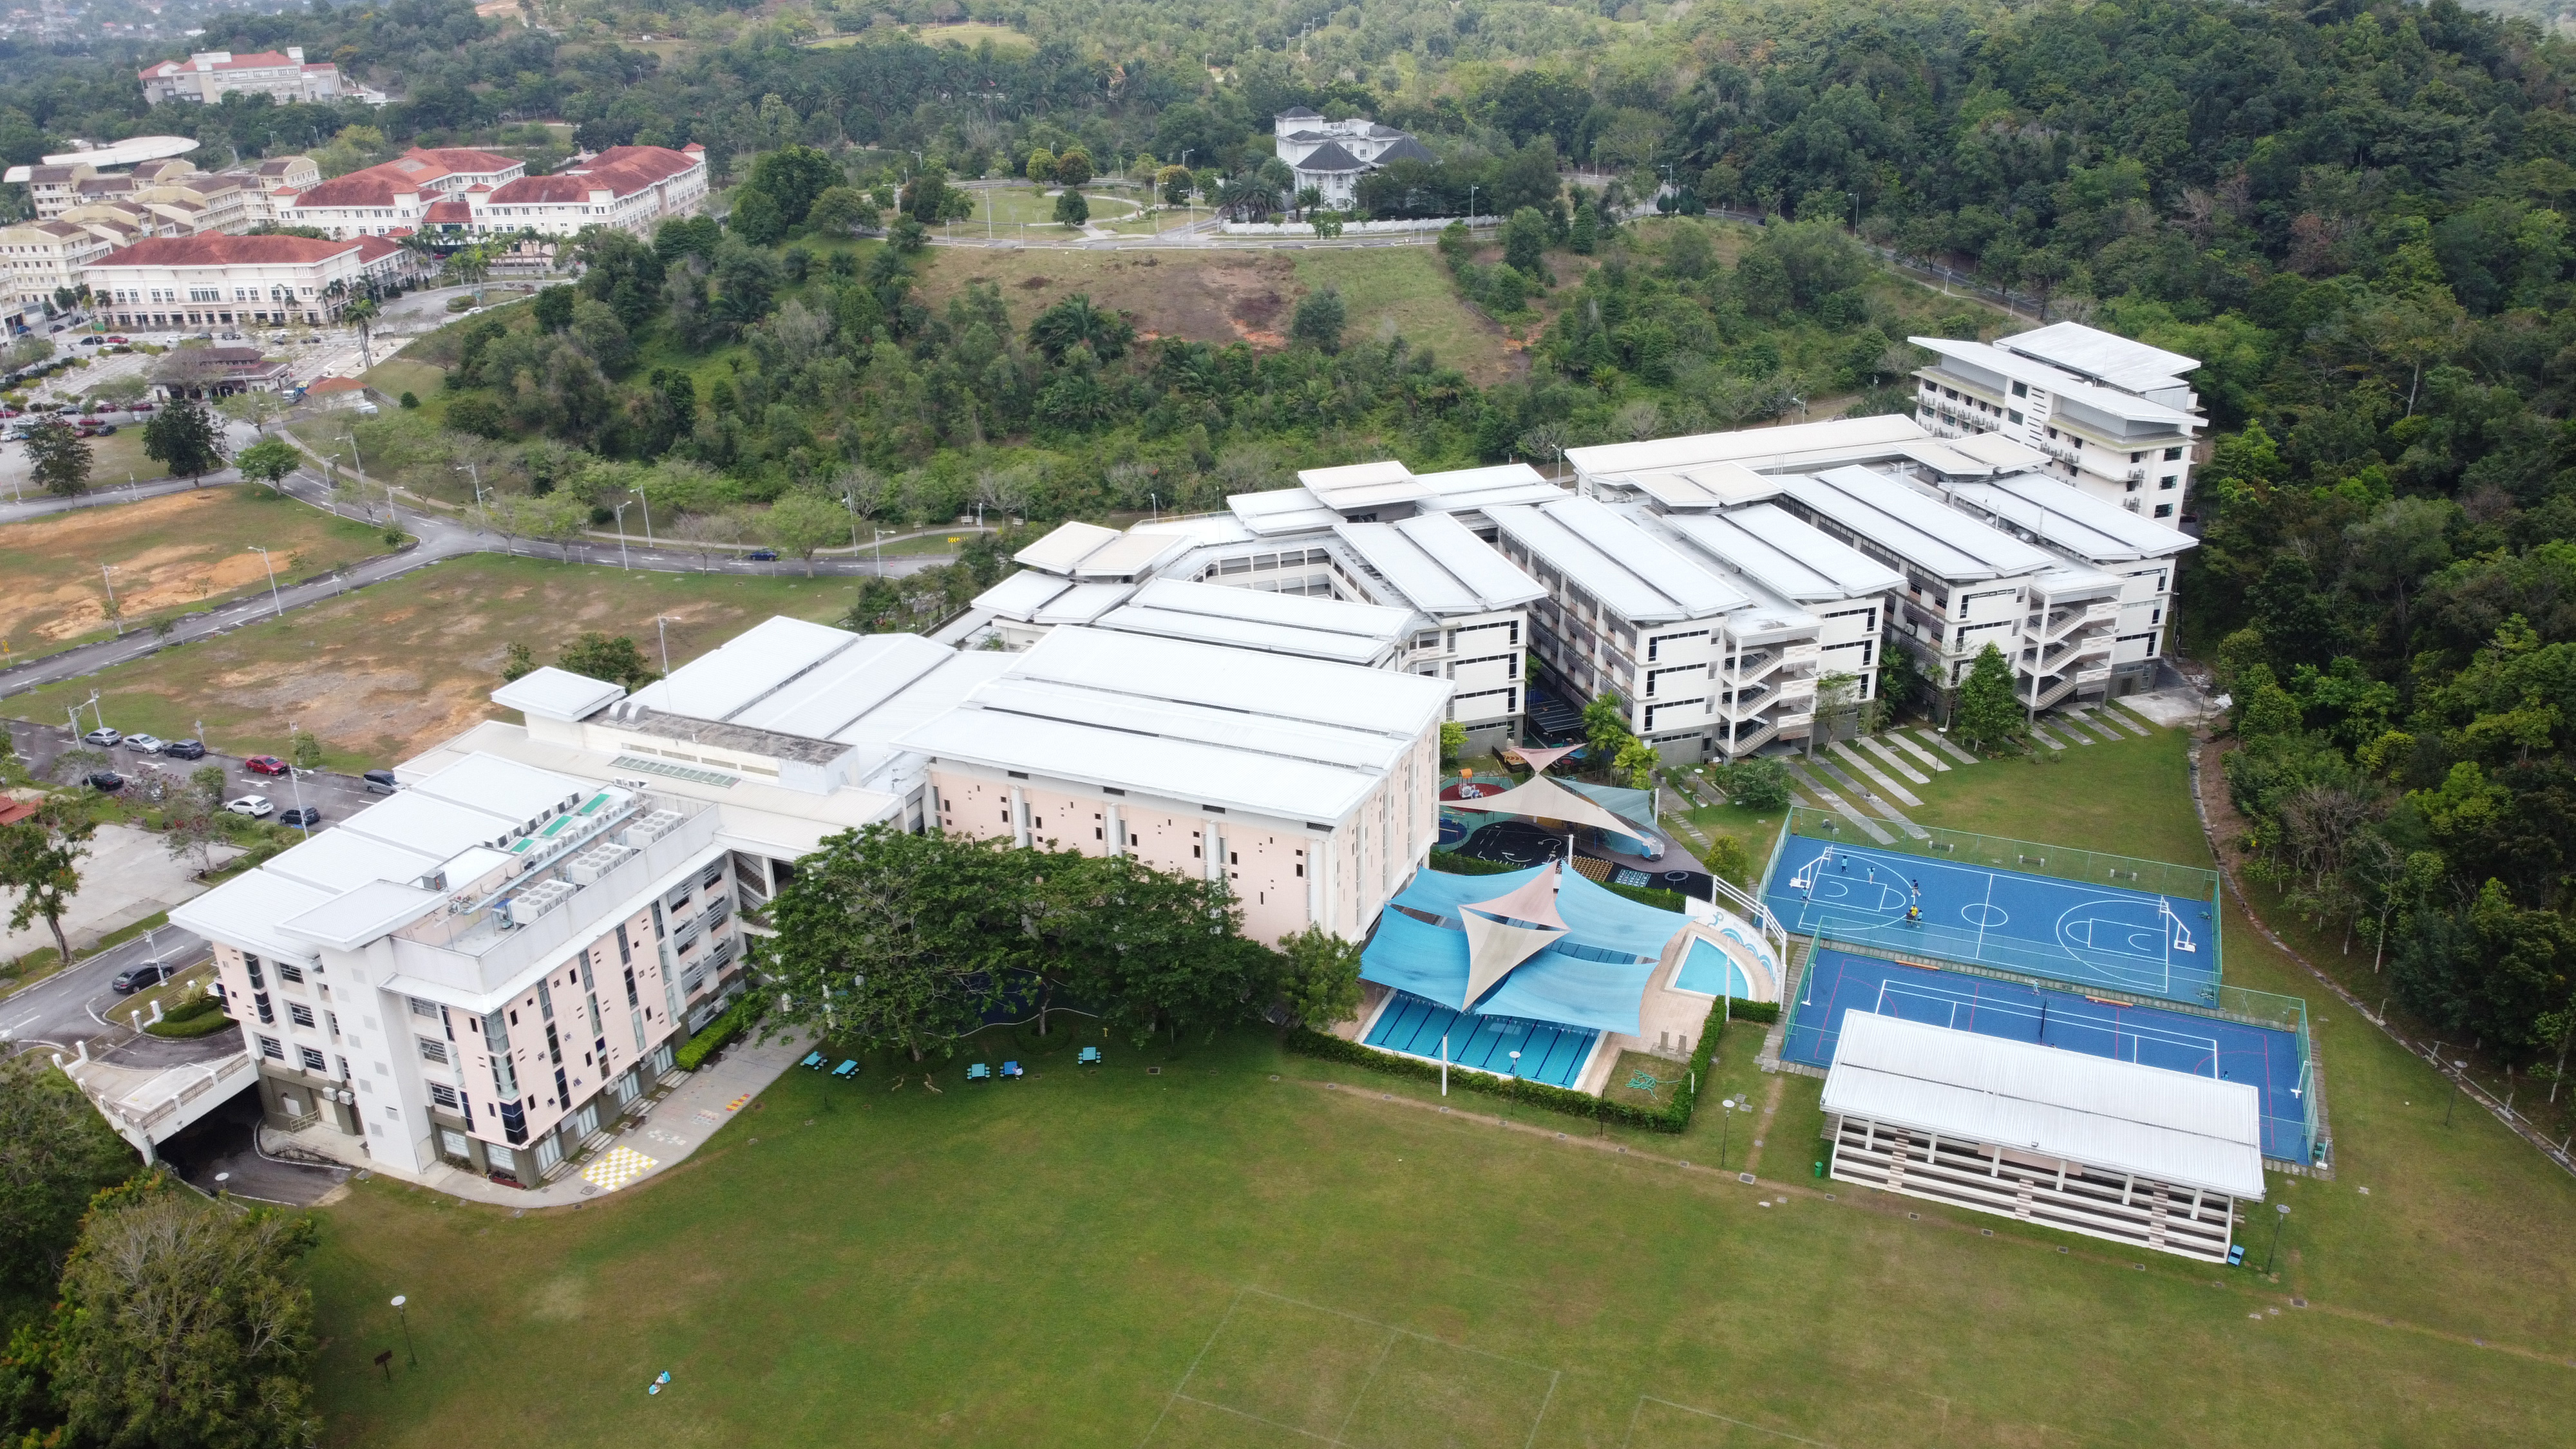 Nexus International School ranked as Top IB in Malaysia, offering for - 18 years | The Edge Markets